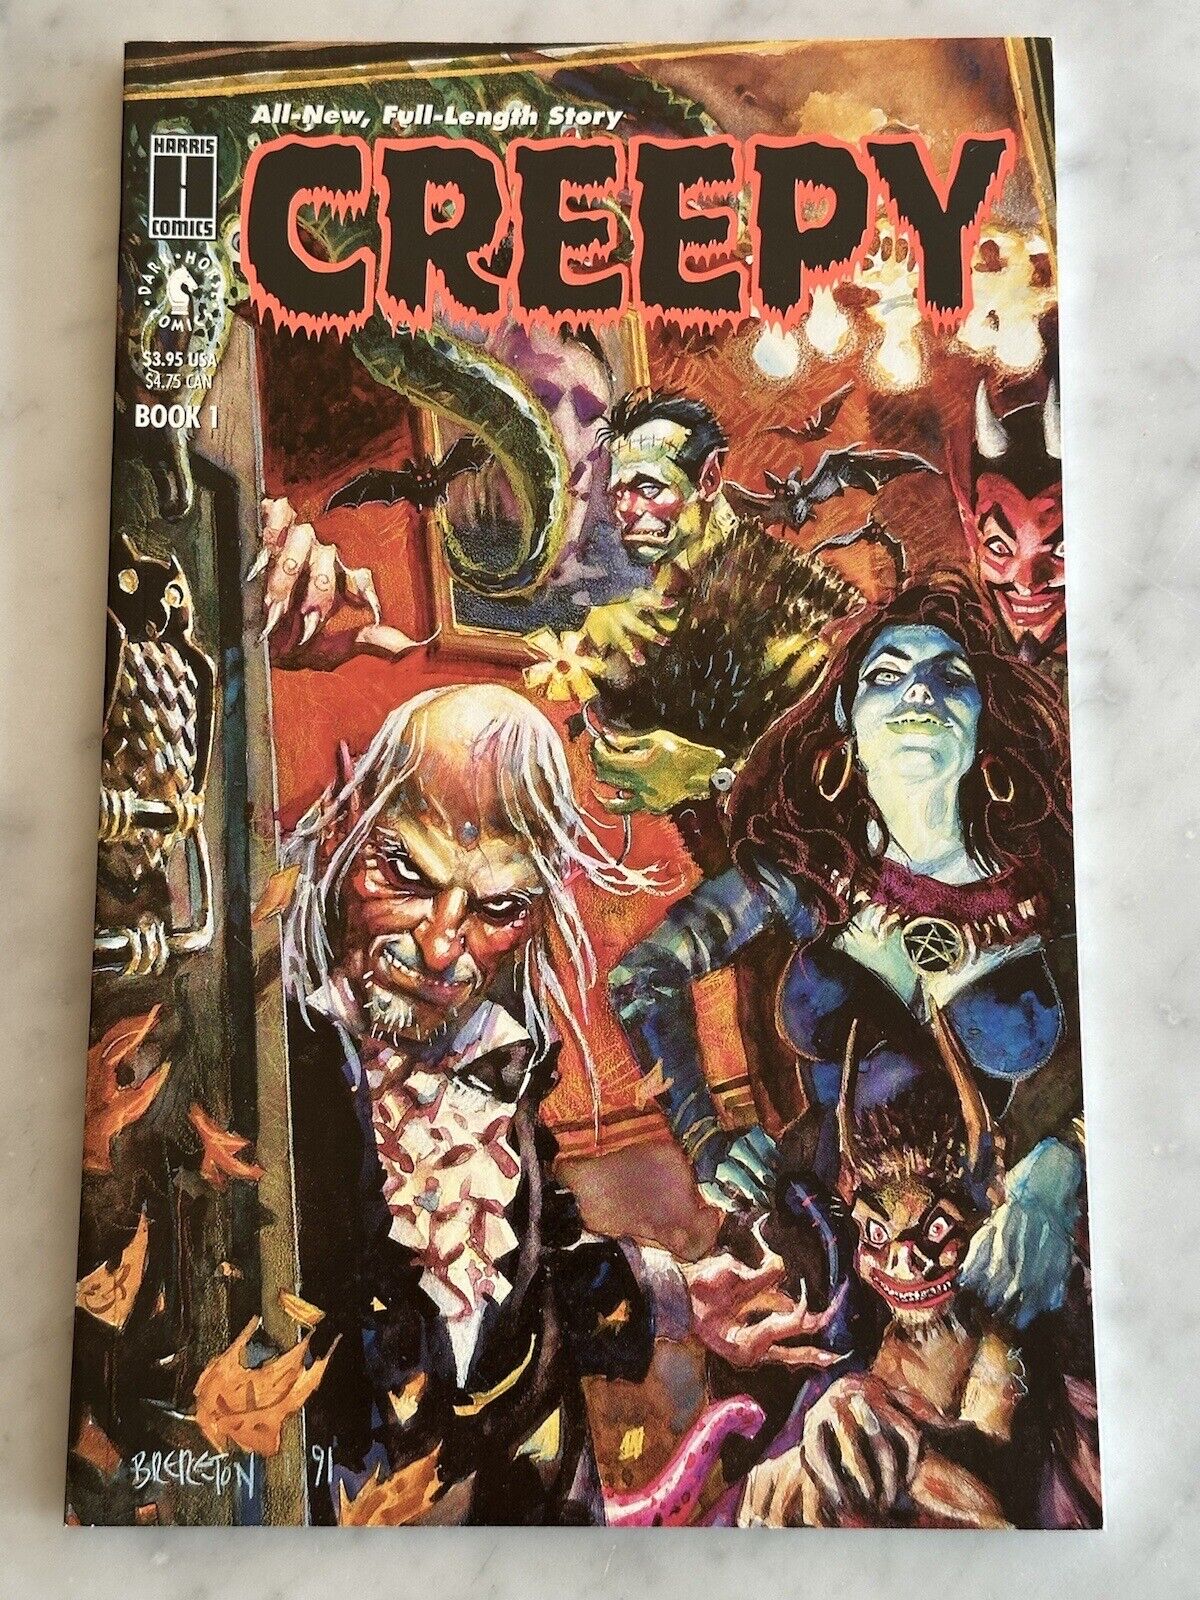 Creepy: The Limited Series #1 in High-Grade NM (Harris, 1992)